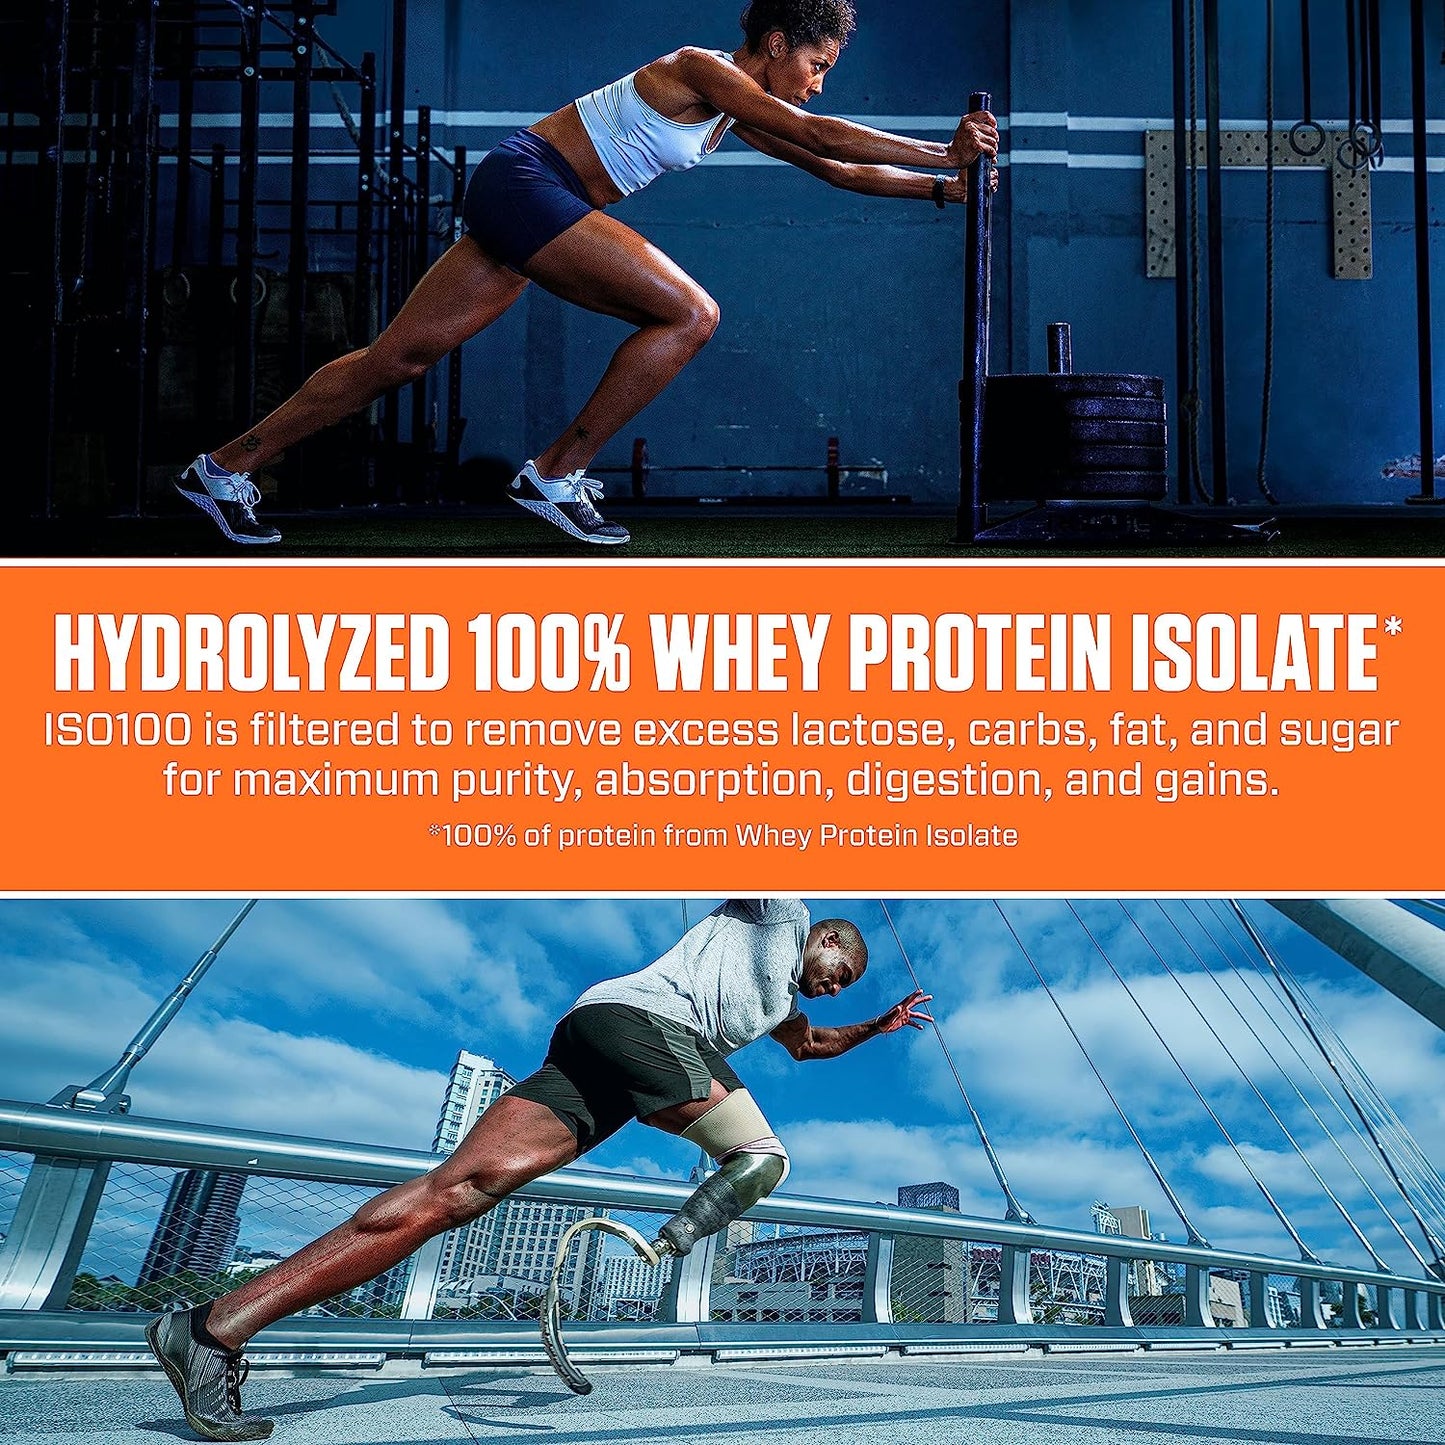 ISO100 Hydrolyzed 100% Whey Isolate Protein Powder in Dunkin' Cappuccino Flavor, 25G Protein, 95Mg Caffeine, 5.5G Bcaas, Gluten Free, Fast Absorbing, Easy Digesting, 20.8 Oz, 1.3 Pound